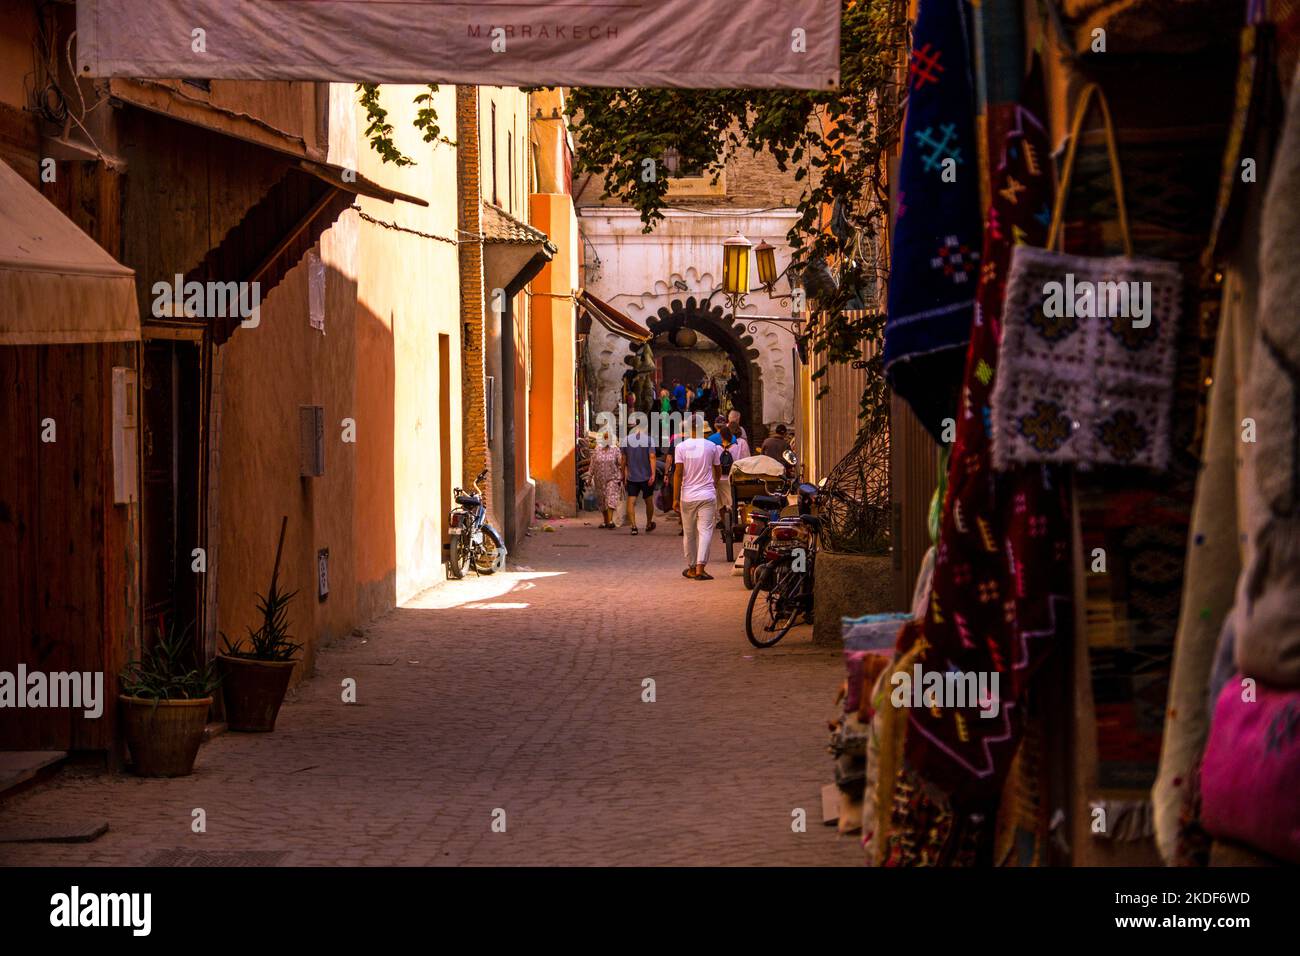 In the souqs of the  medina ( old town) of Marrakech, Morocco Stock Photo